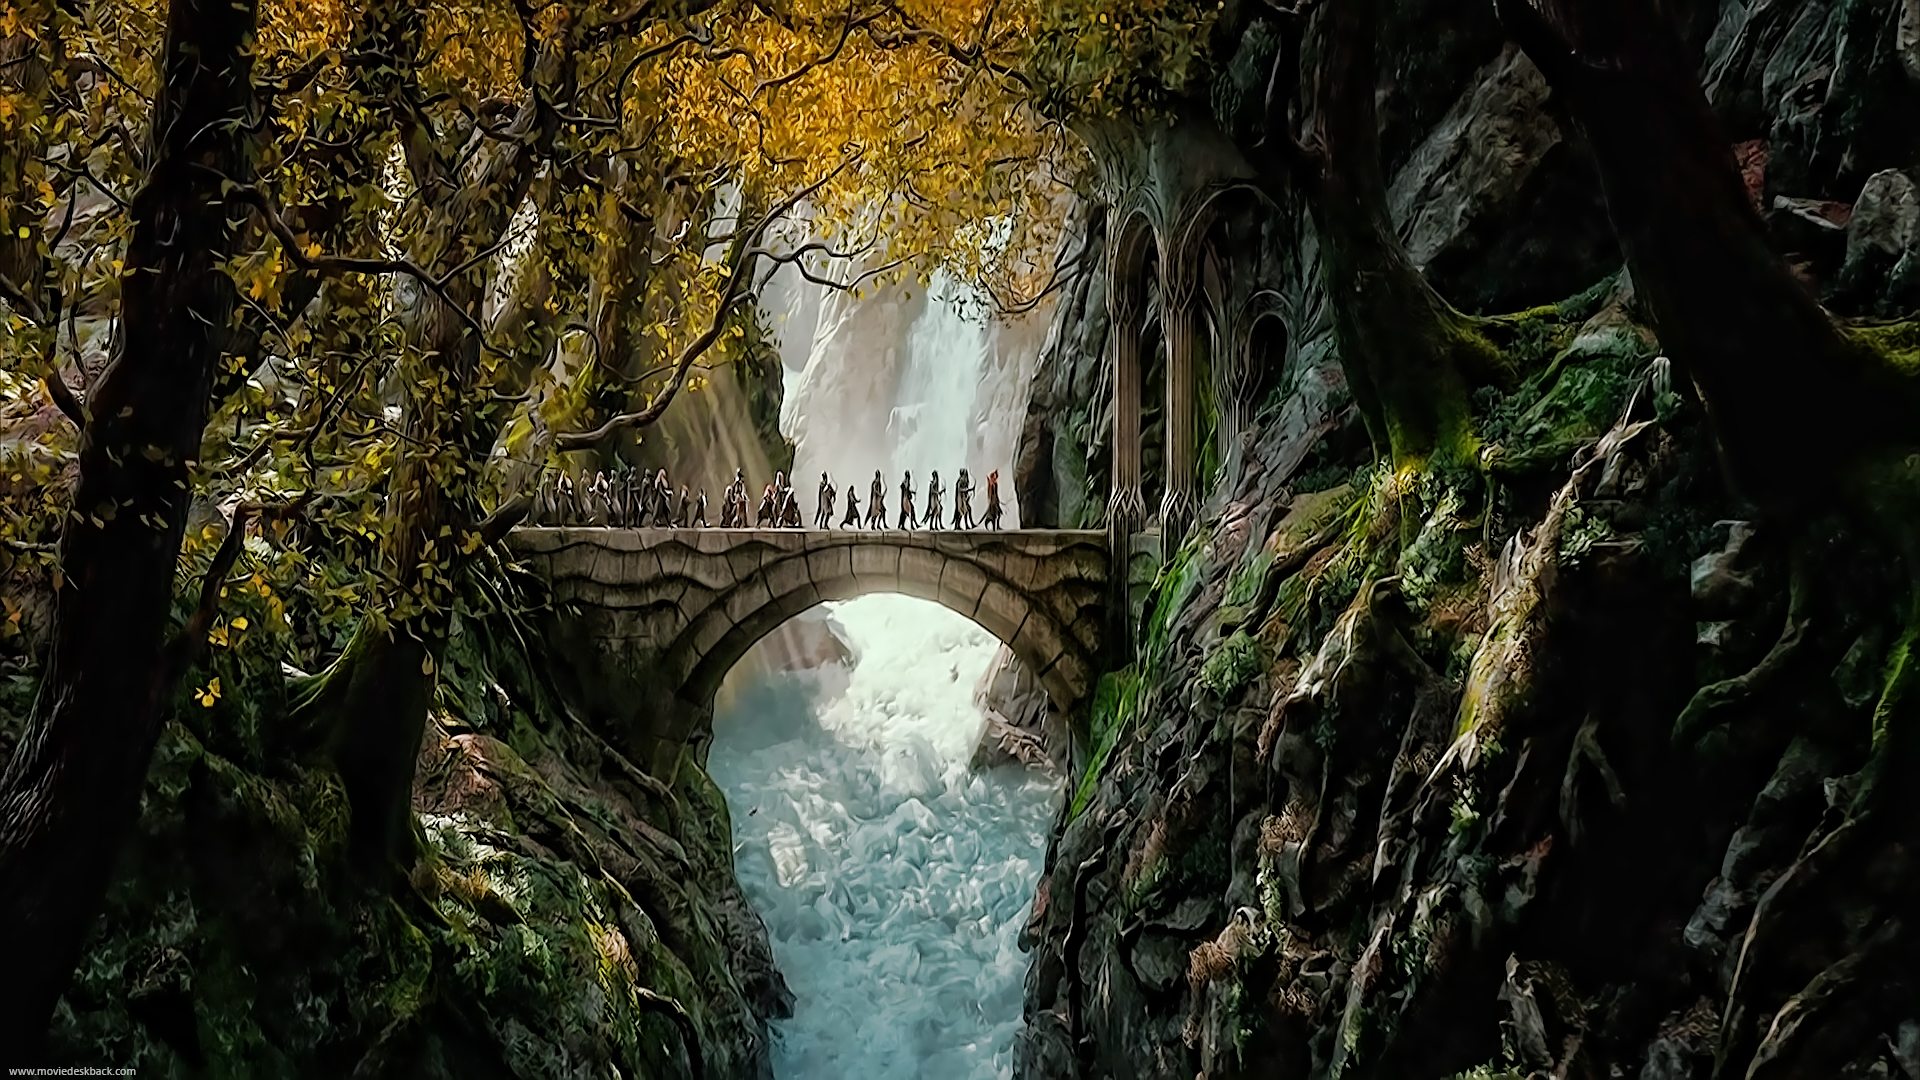 The Hobbit: The Desolation of Smaug download